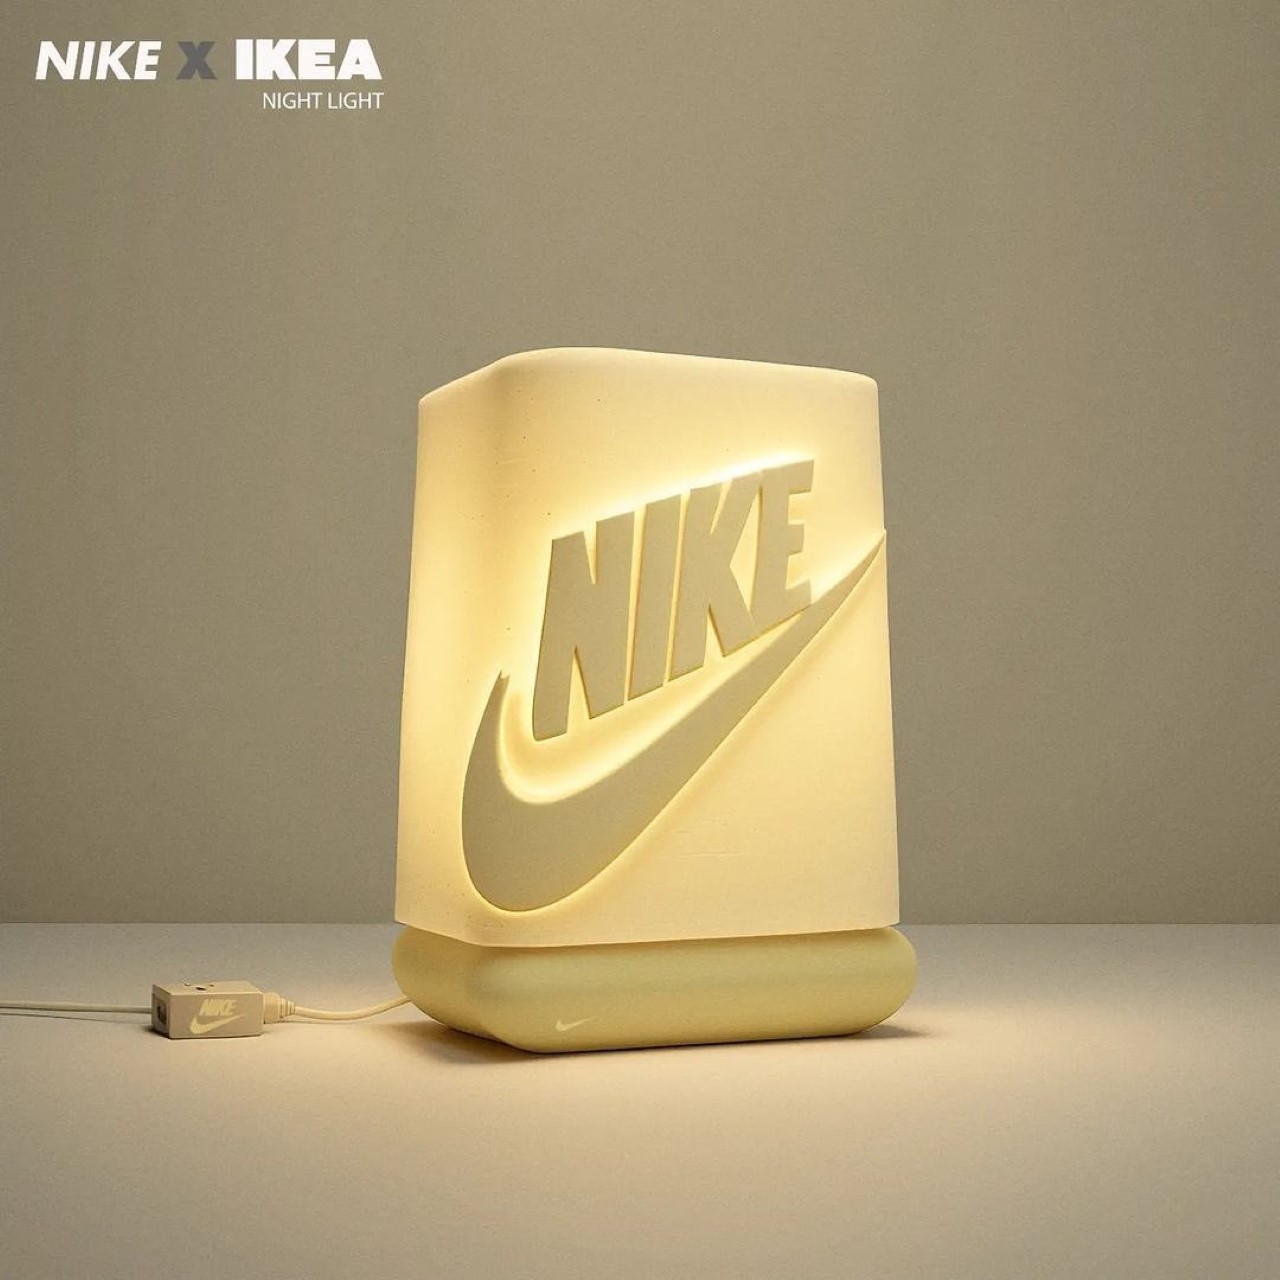 The Ultimate Nike x IKEA Mashup: These Sporty Decor Items Were Created by an AI - Yanko Design